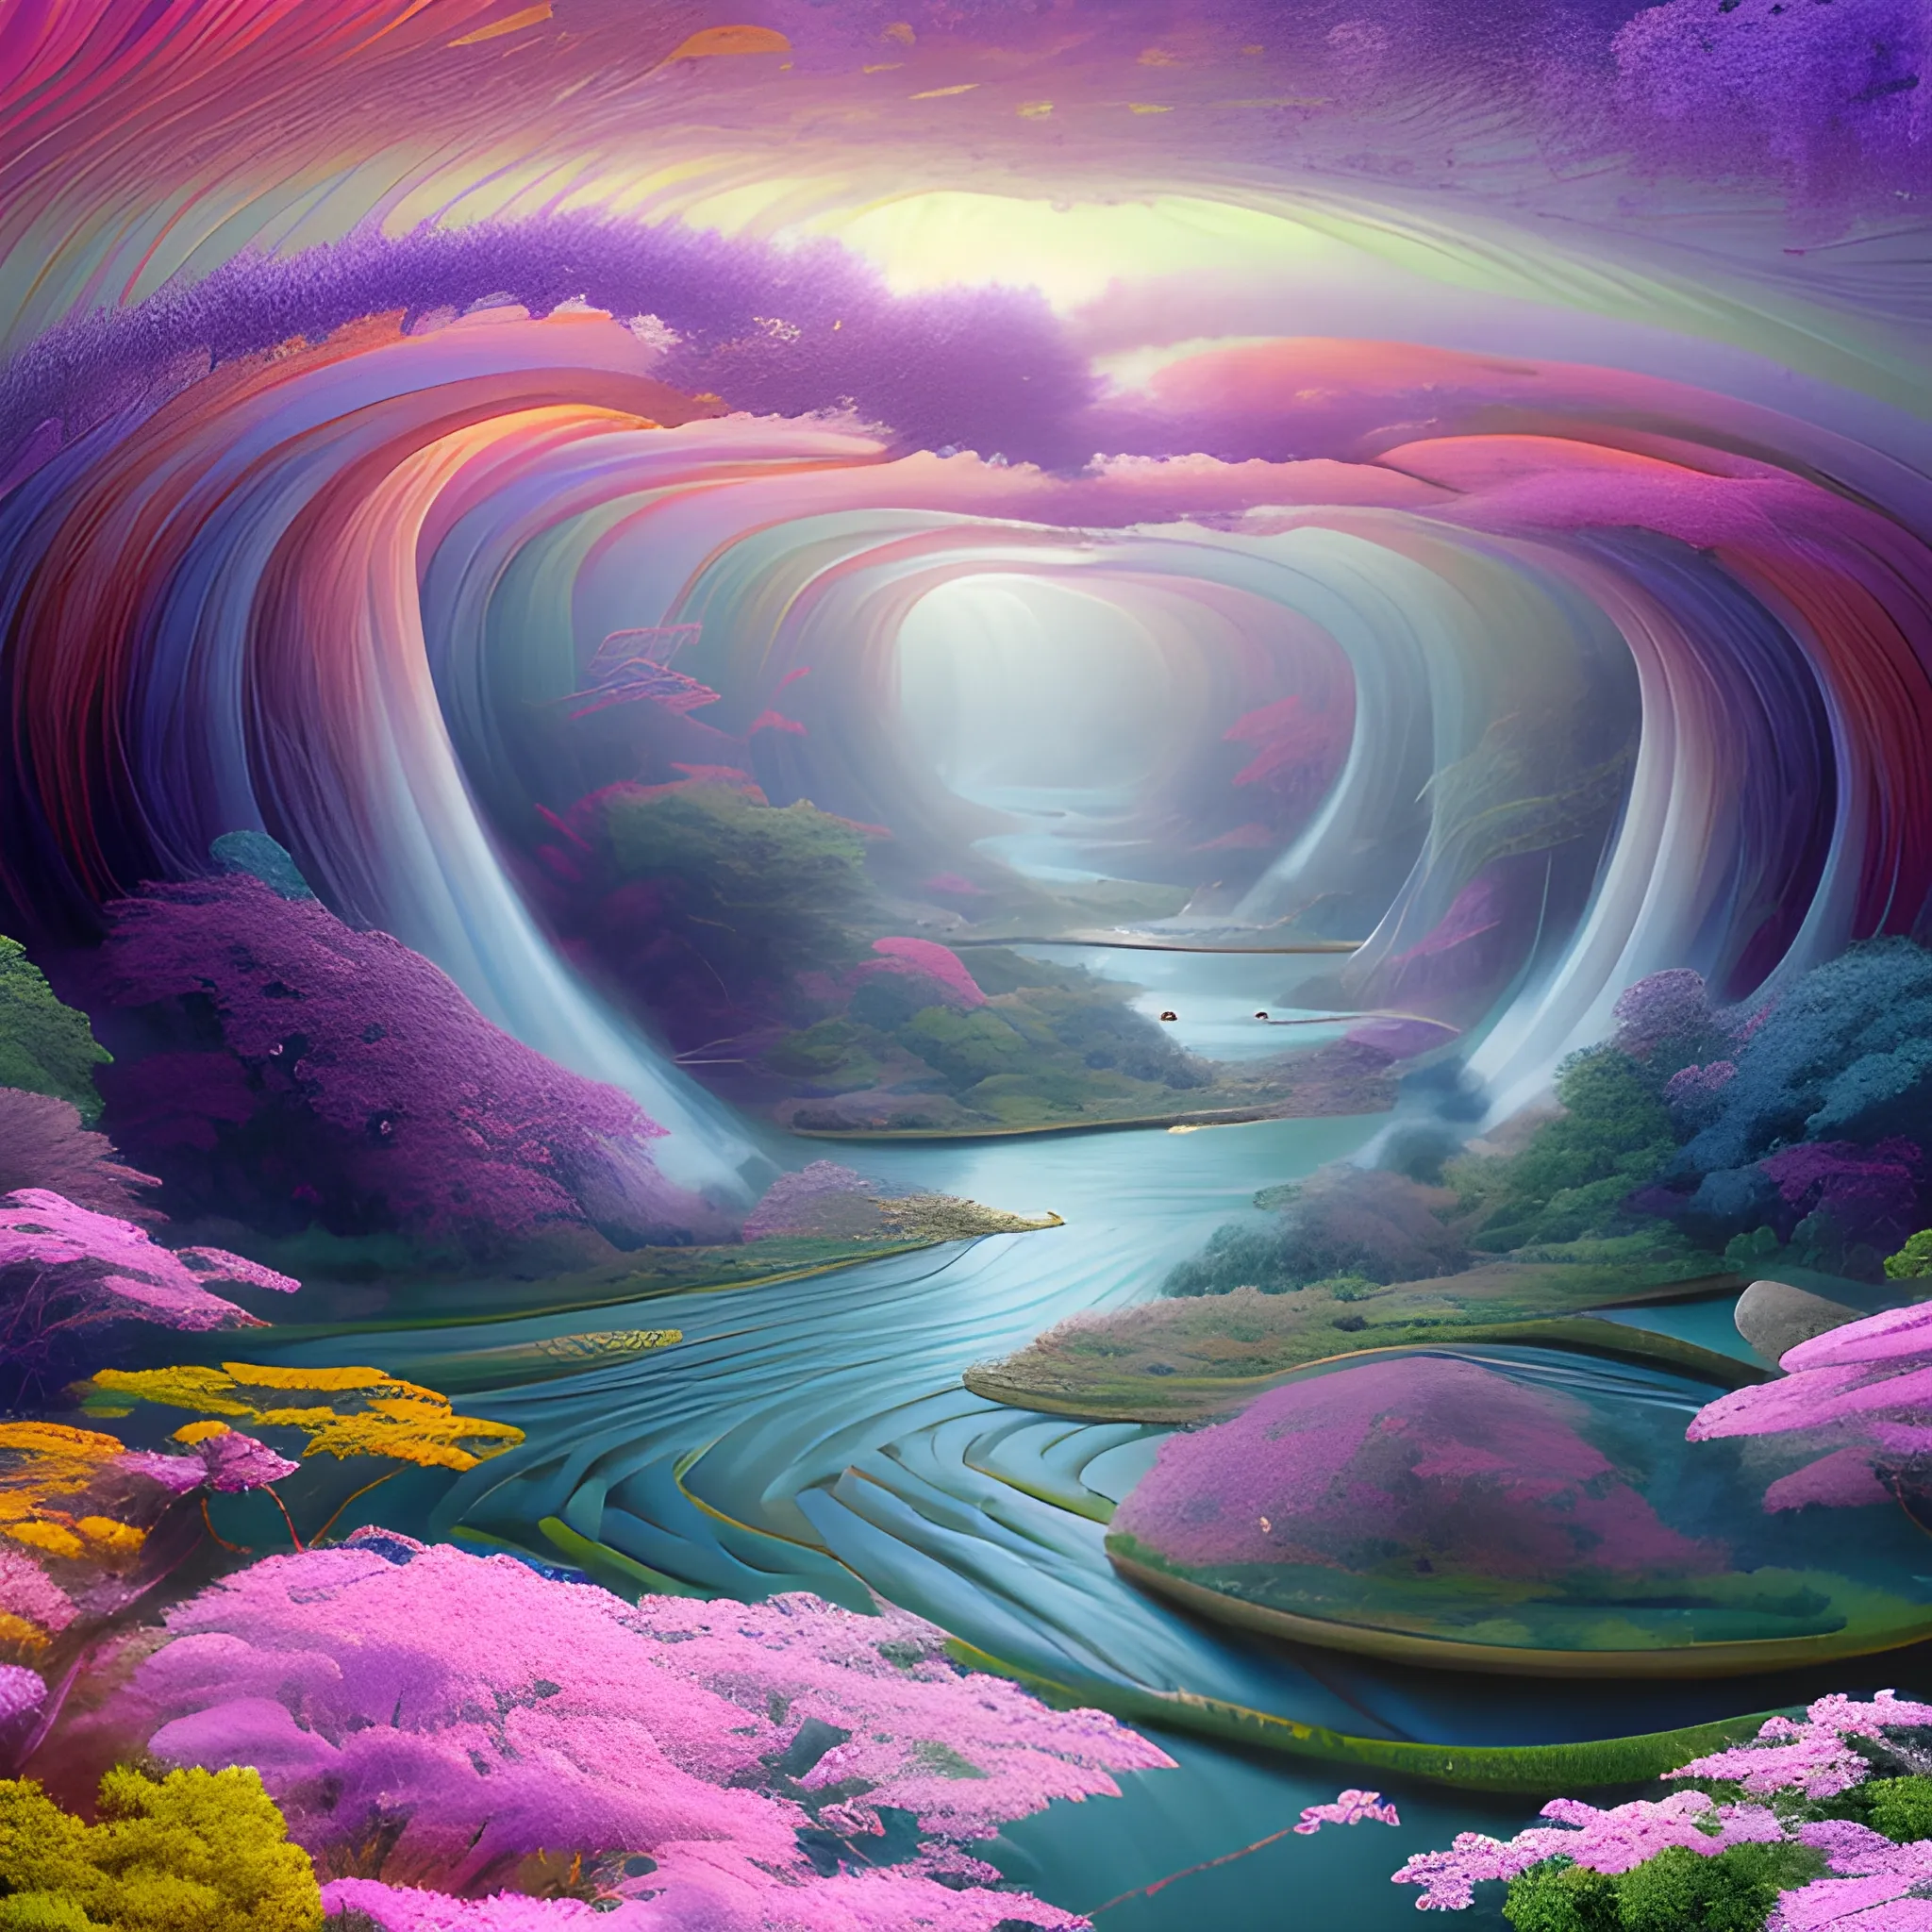 (by Ananta Mandal (and Andrew Biraj:0.5)), (in the style of nihonga), Style: Abstract, Medium: Digital illustration, Subject: An otherworldly landscape with floating islands, A Bodhisattva of Compassion in the middle of picture, cascading waterfalls, and vibrant flora and fauna. Camera Angle: Overhead shot capturing the vastness and intricate details of the scene. The colors are saturated, and the lighting creates a warm and ethereal atmosphere. The painting is highly detailed, with every brushstroke capturing the complexity of the imaginary world., (high quality), (detailed), (masterpiece), (best quality), (highres), (extremely detailed), (8k), seed:792315689